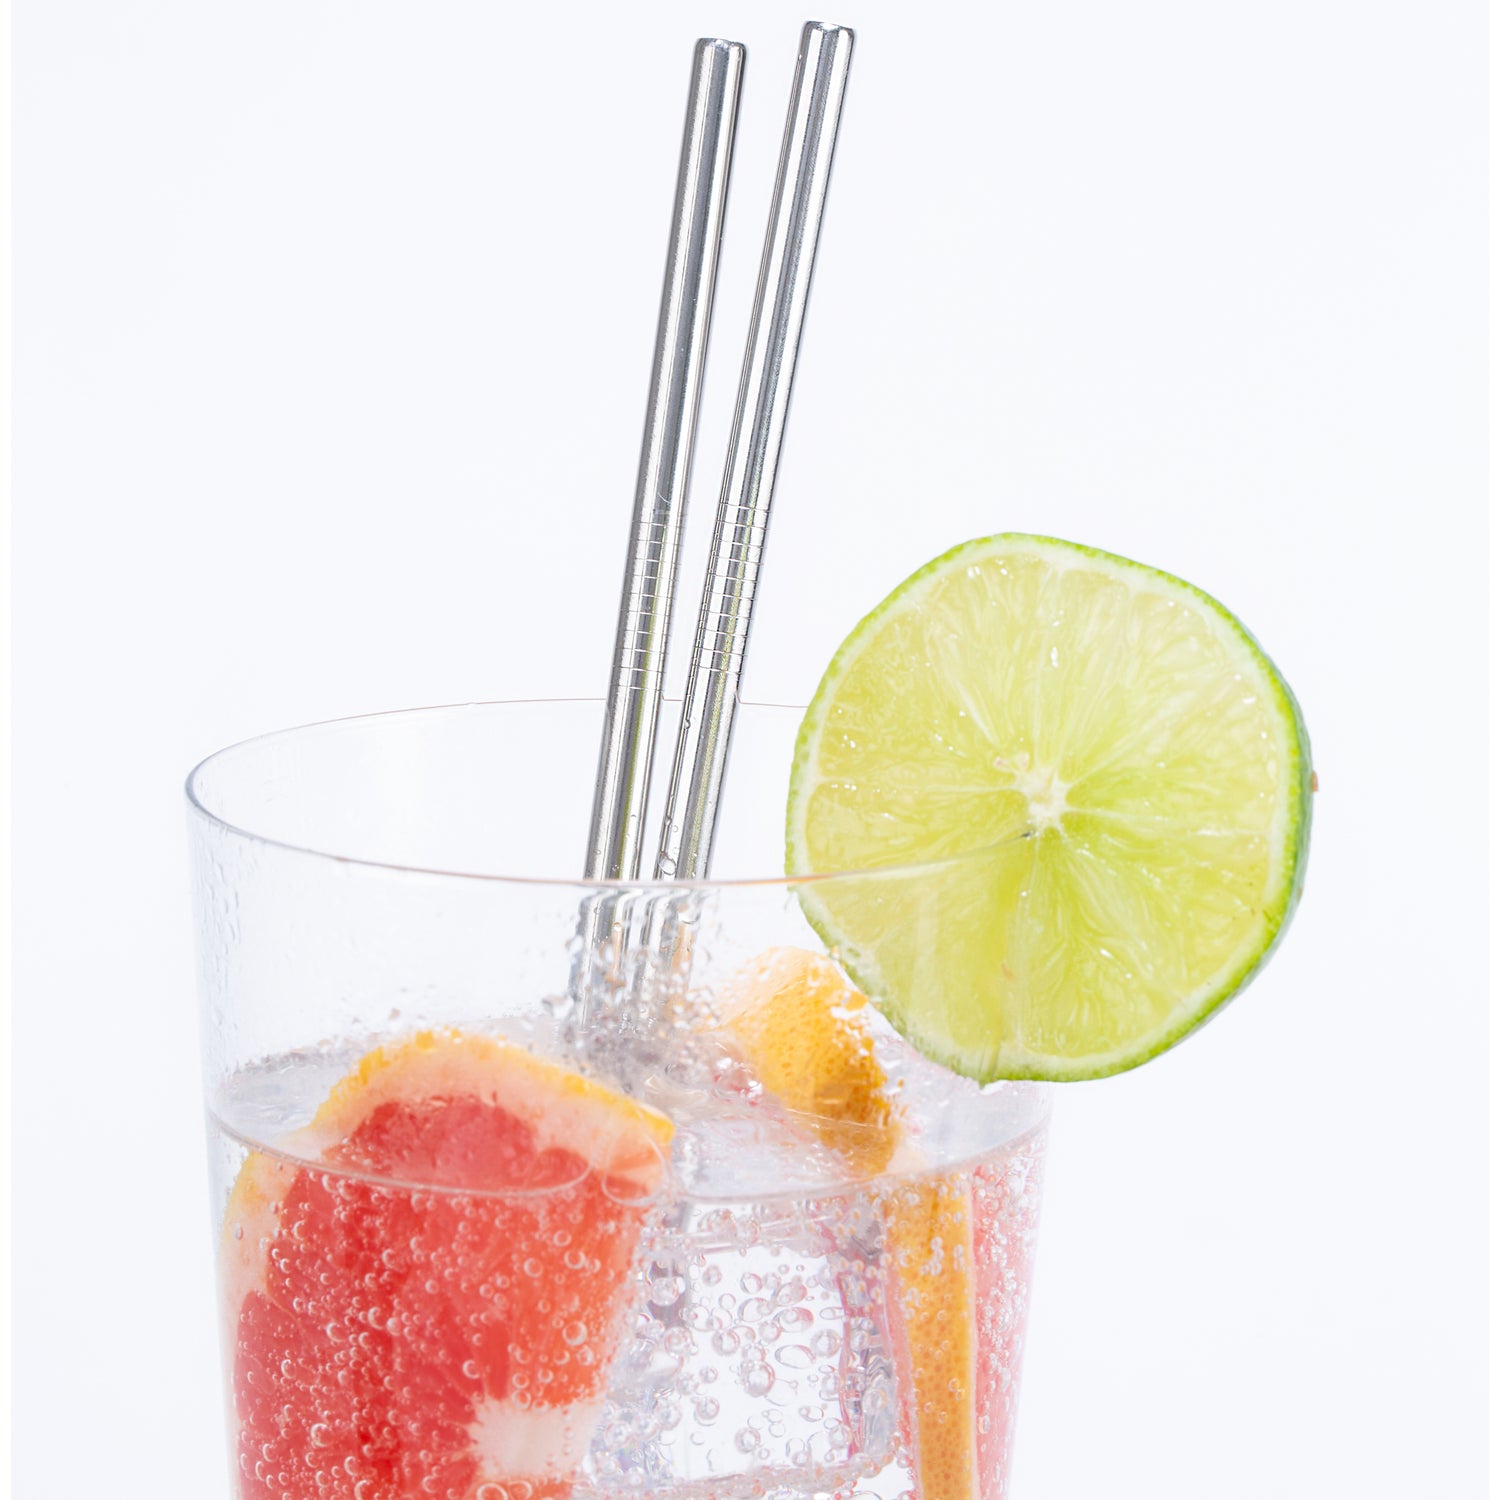 https://cdn.shopify.com/s/files/1/1140/3964/products/CU268_StainlessSteelStraws_action_1.jpg?v=1700165160&width=1500